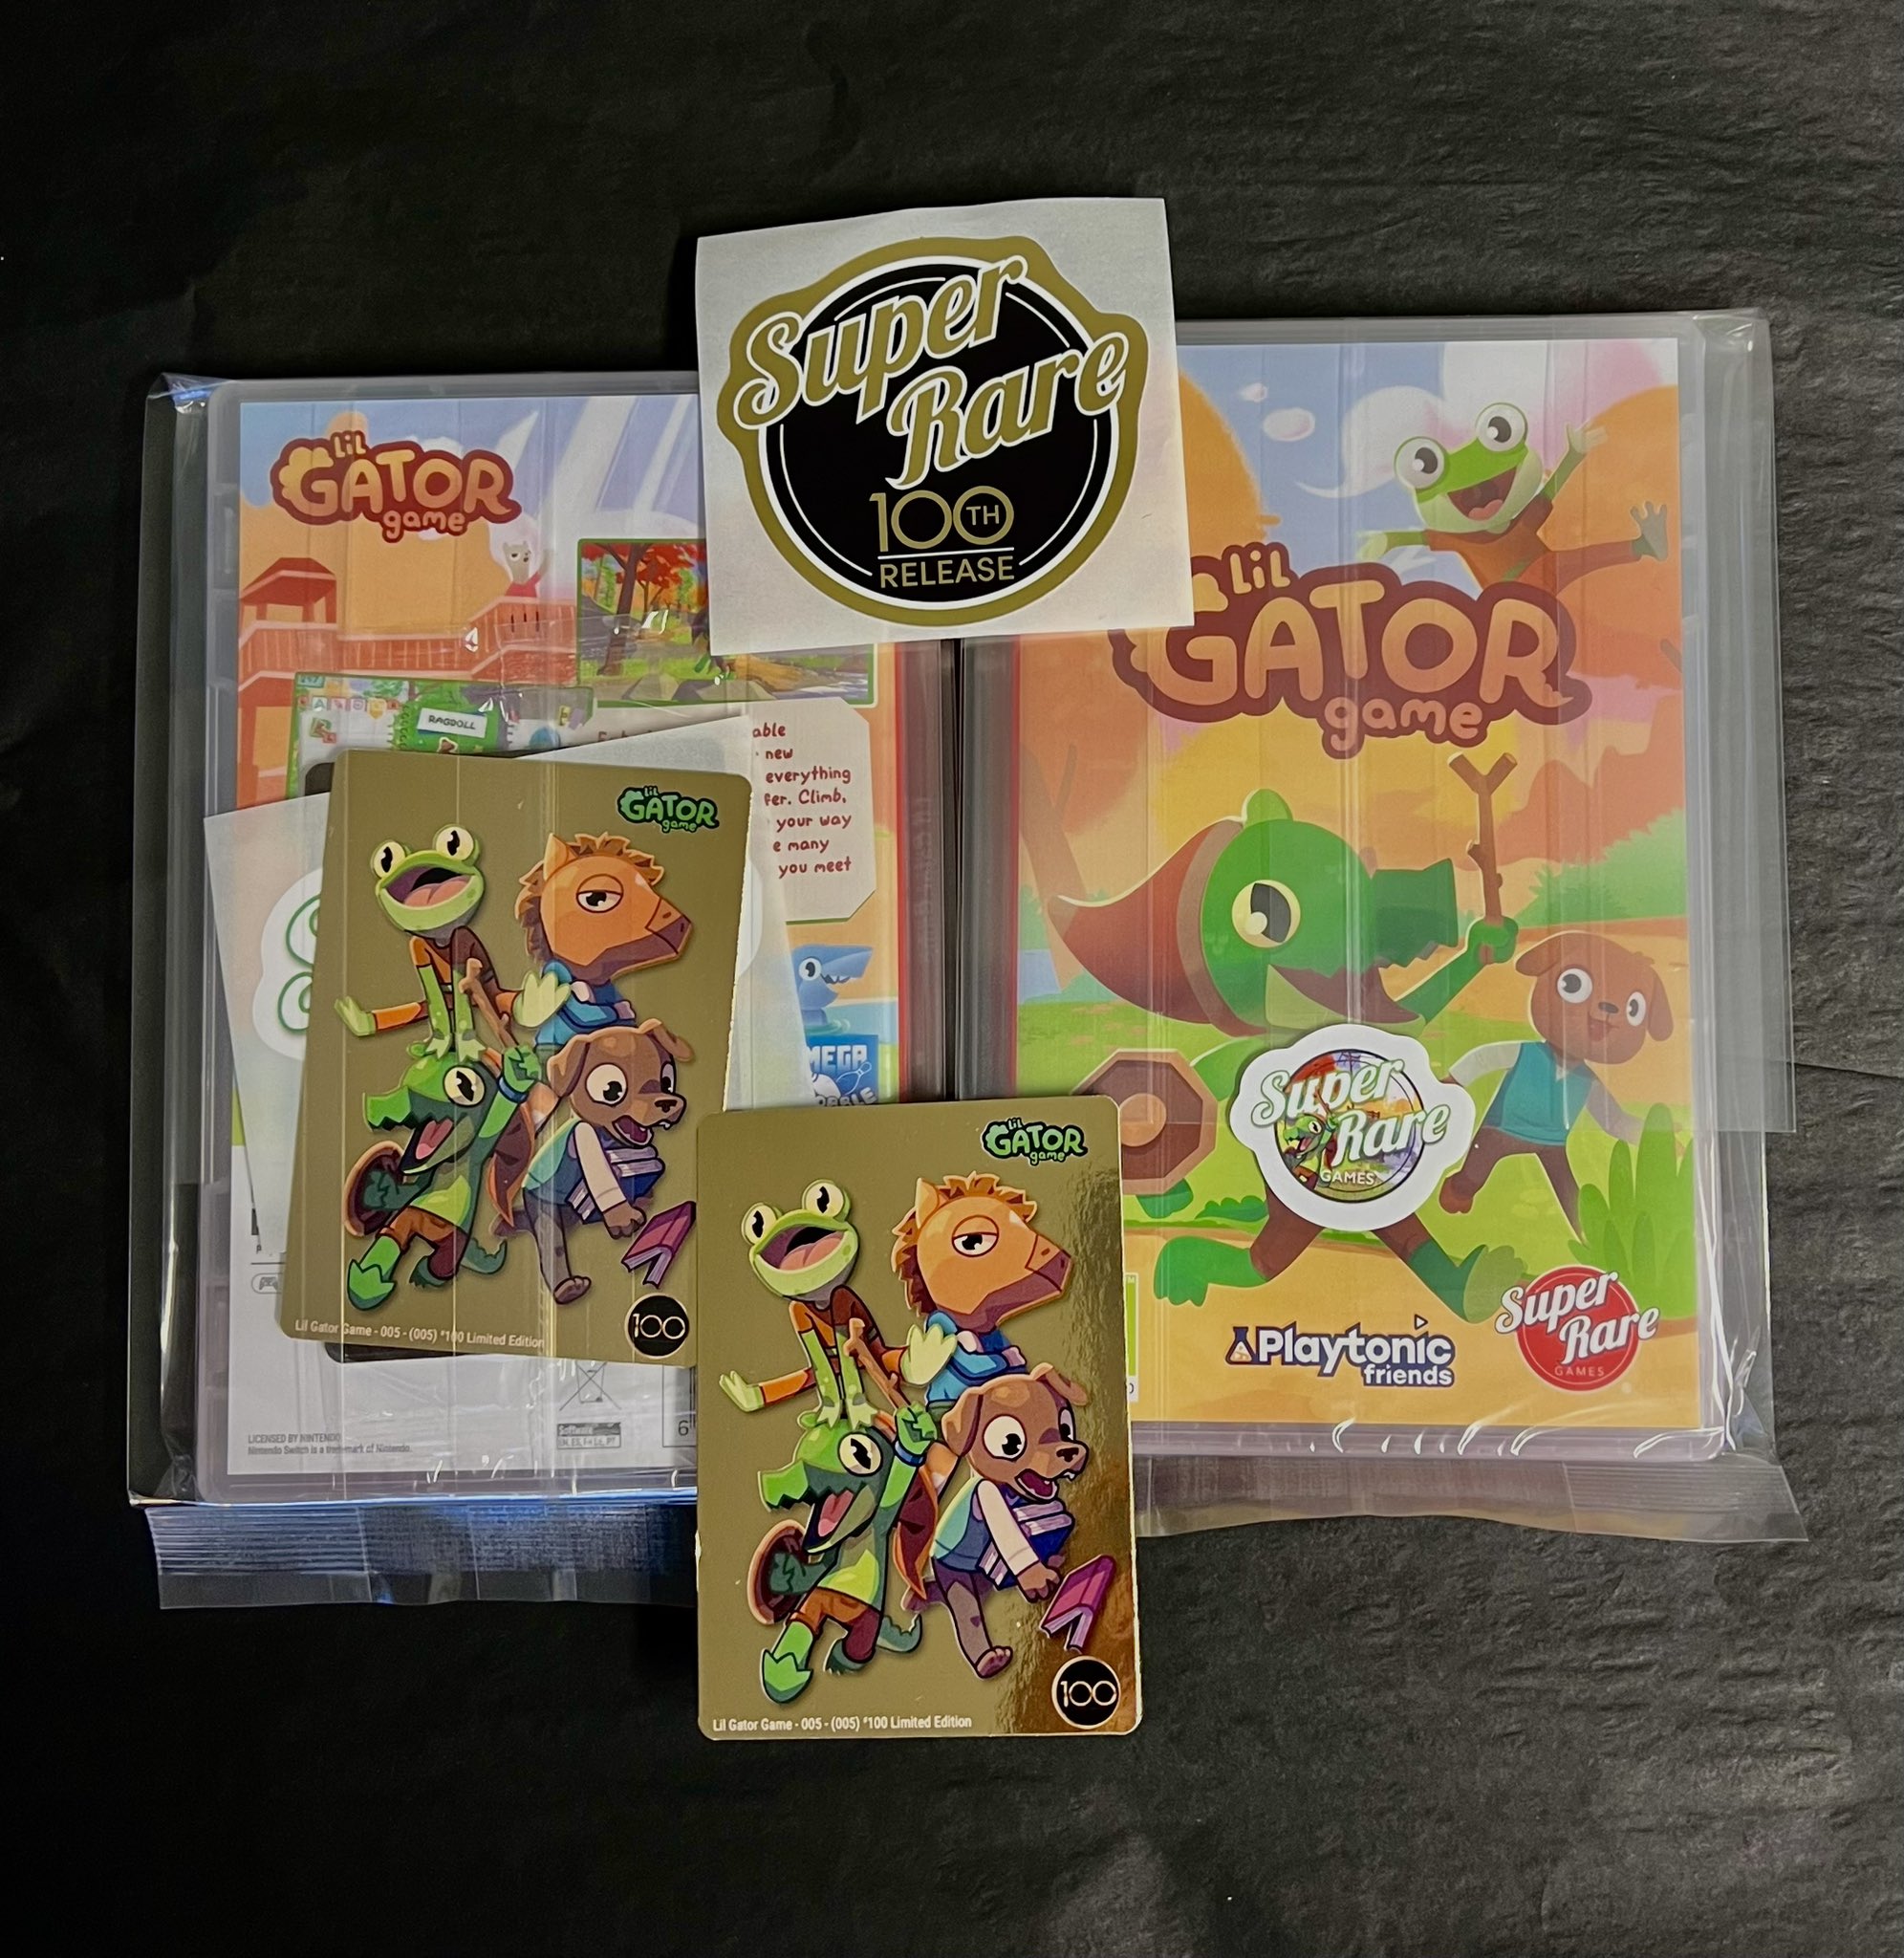 Collector's Edition] CE#12: Lil Gator Game (Switch) – Super Rare Games